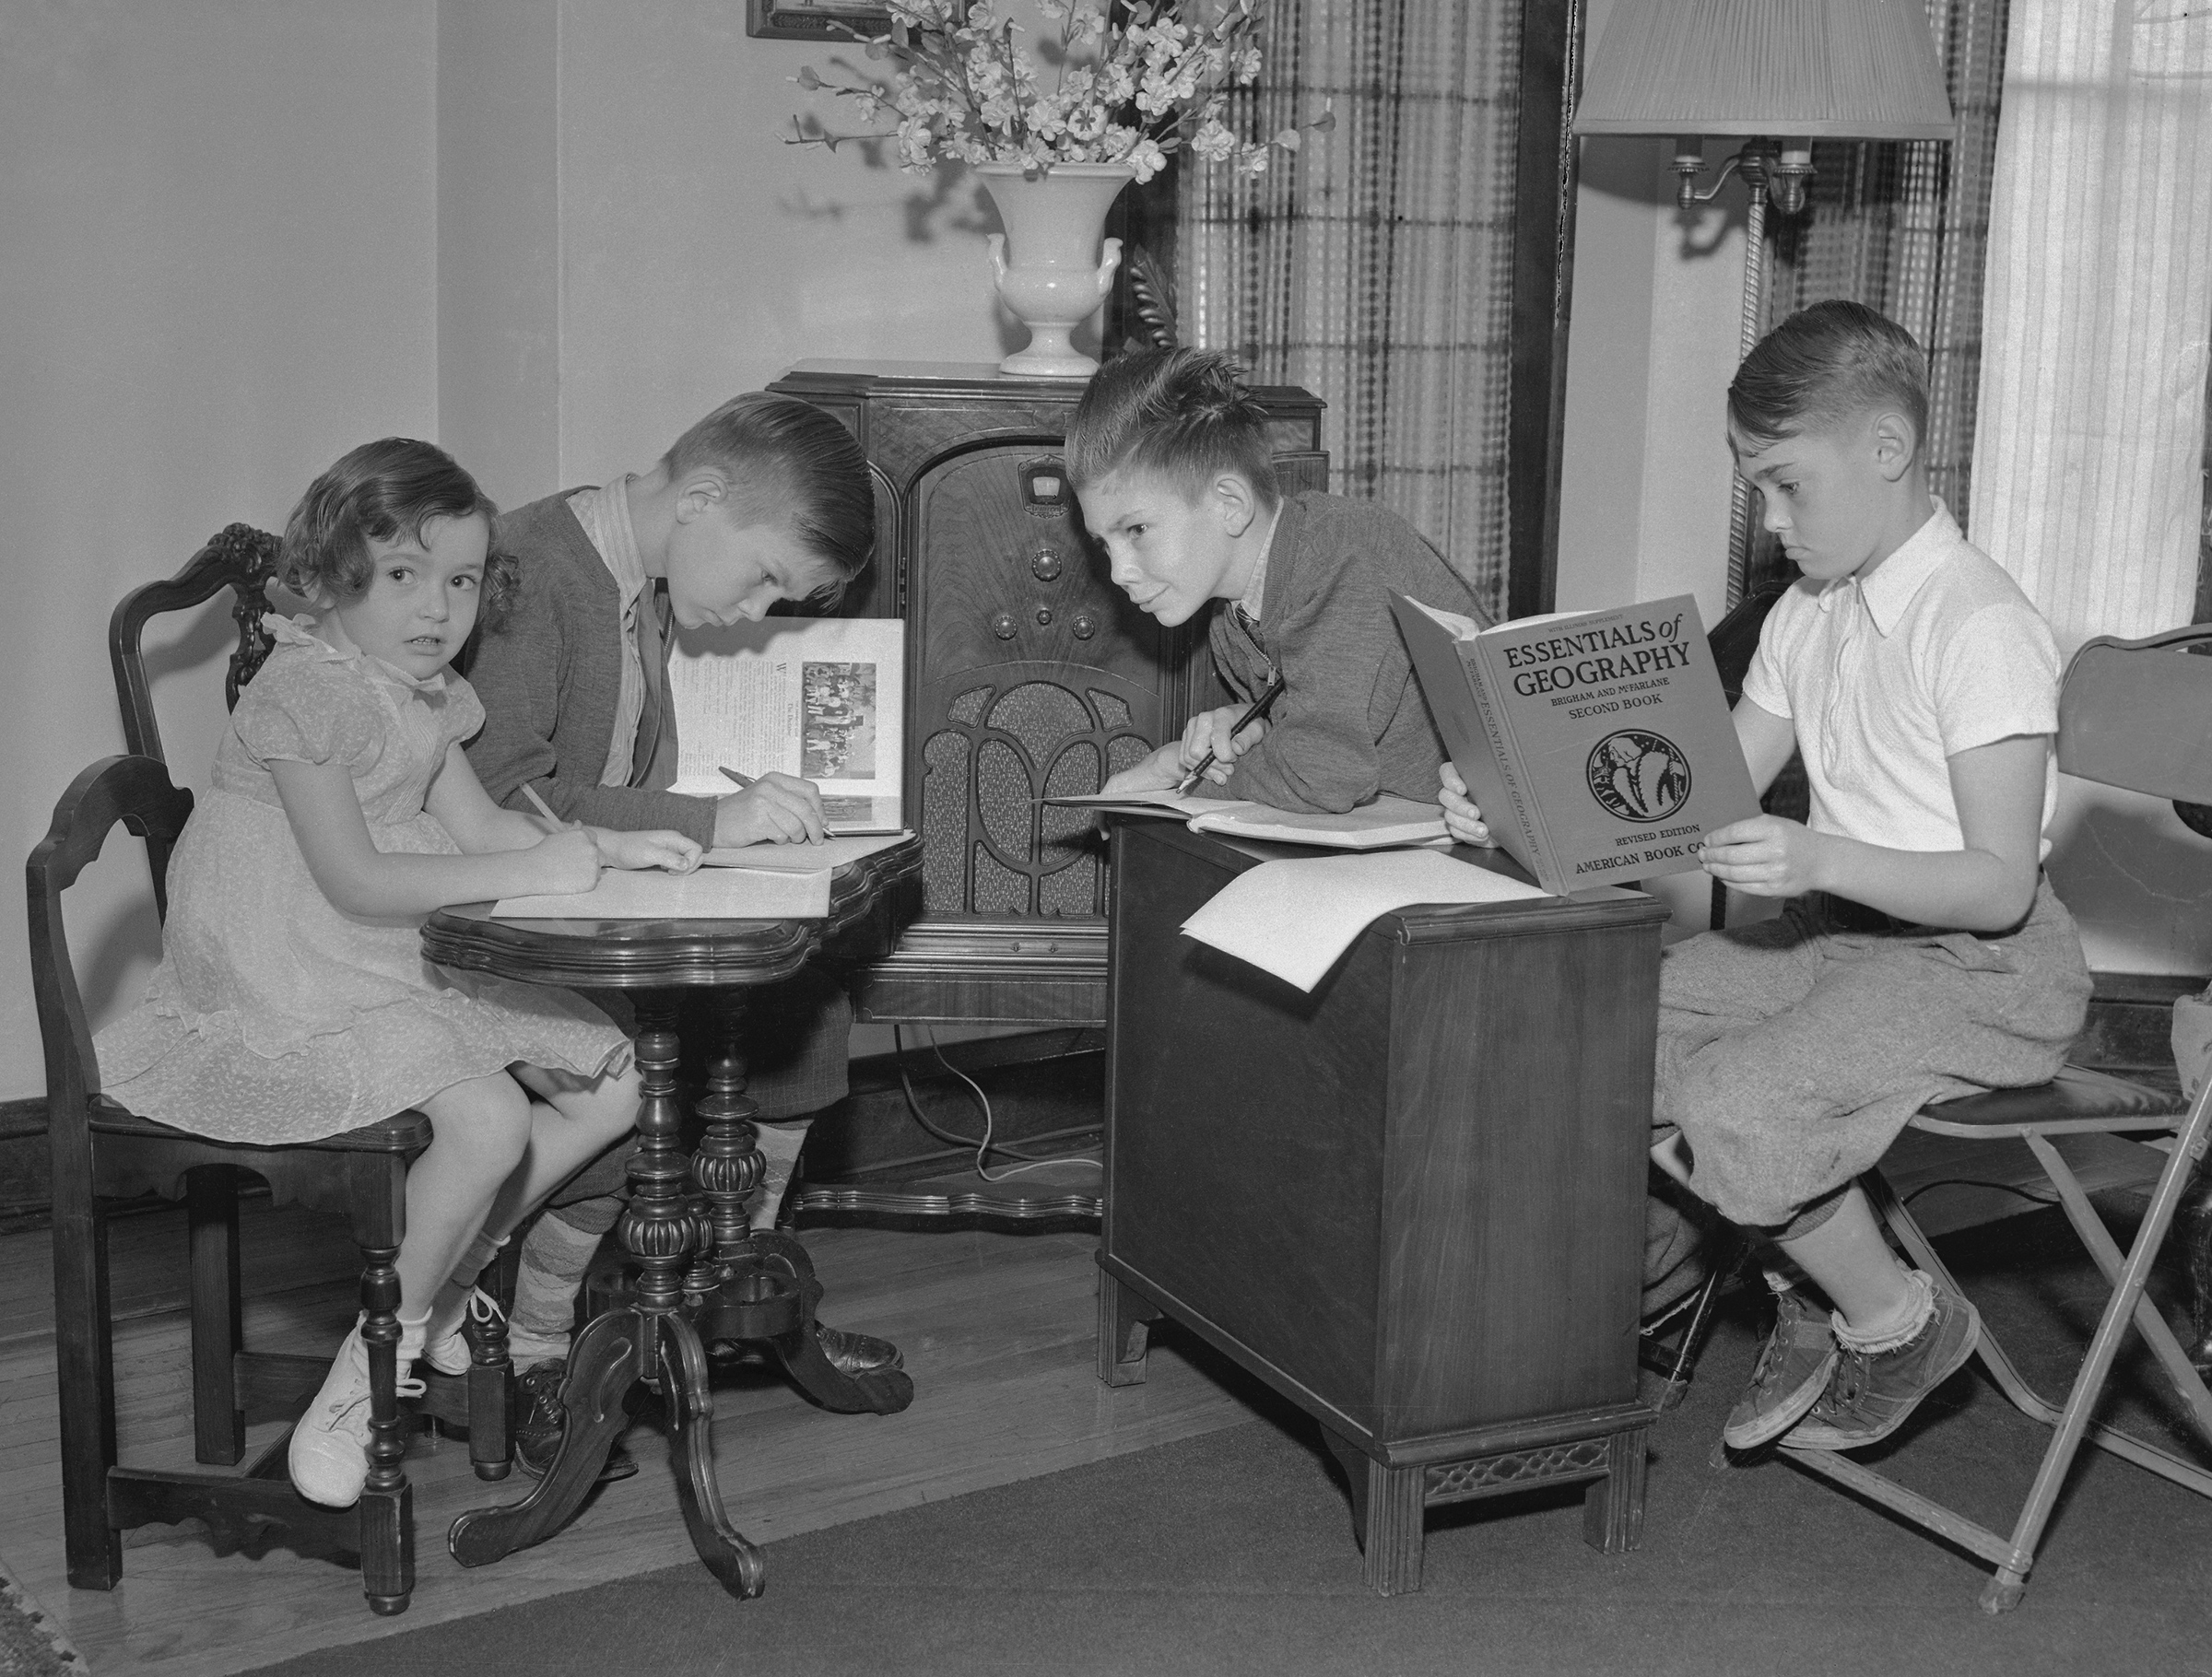 Due to the Infantile Paralysis Epidemic in Chicago, the reopening of schools was delayed. Students listen to a pre-arranged course of study via the radio stations, in accordance with a schedule drawn up by several school principals, on Sept 13, 1937